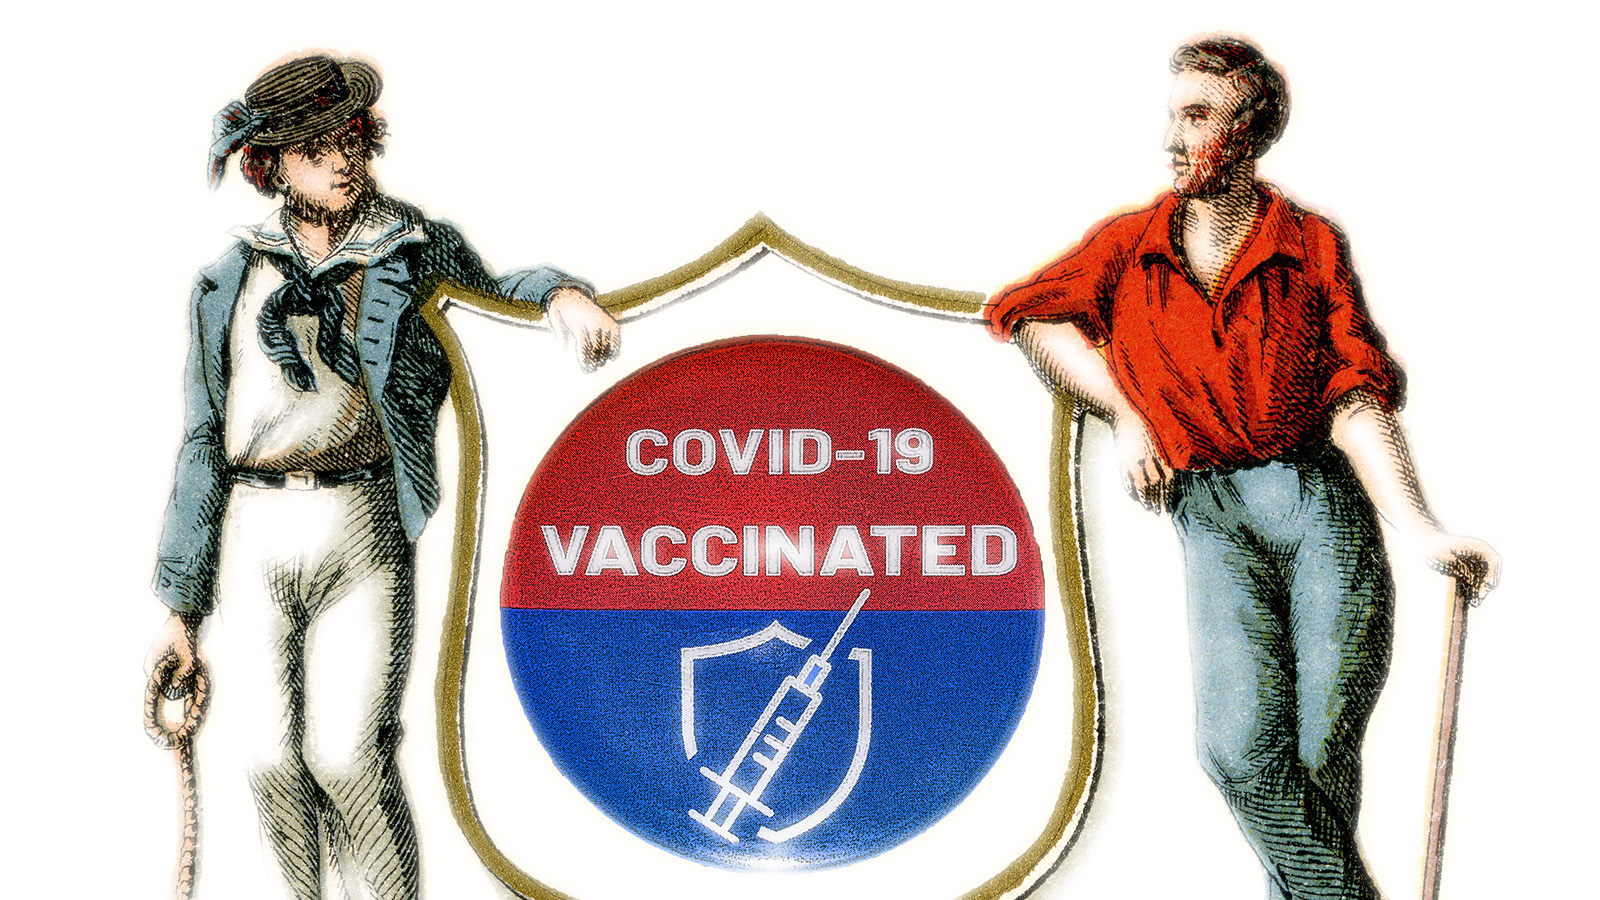 An illustration with two figures from the Wisconsin coat of arms leaning on a shield with a button reading "COVID-19 vaccinated."